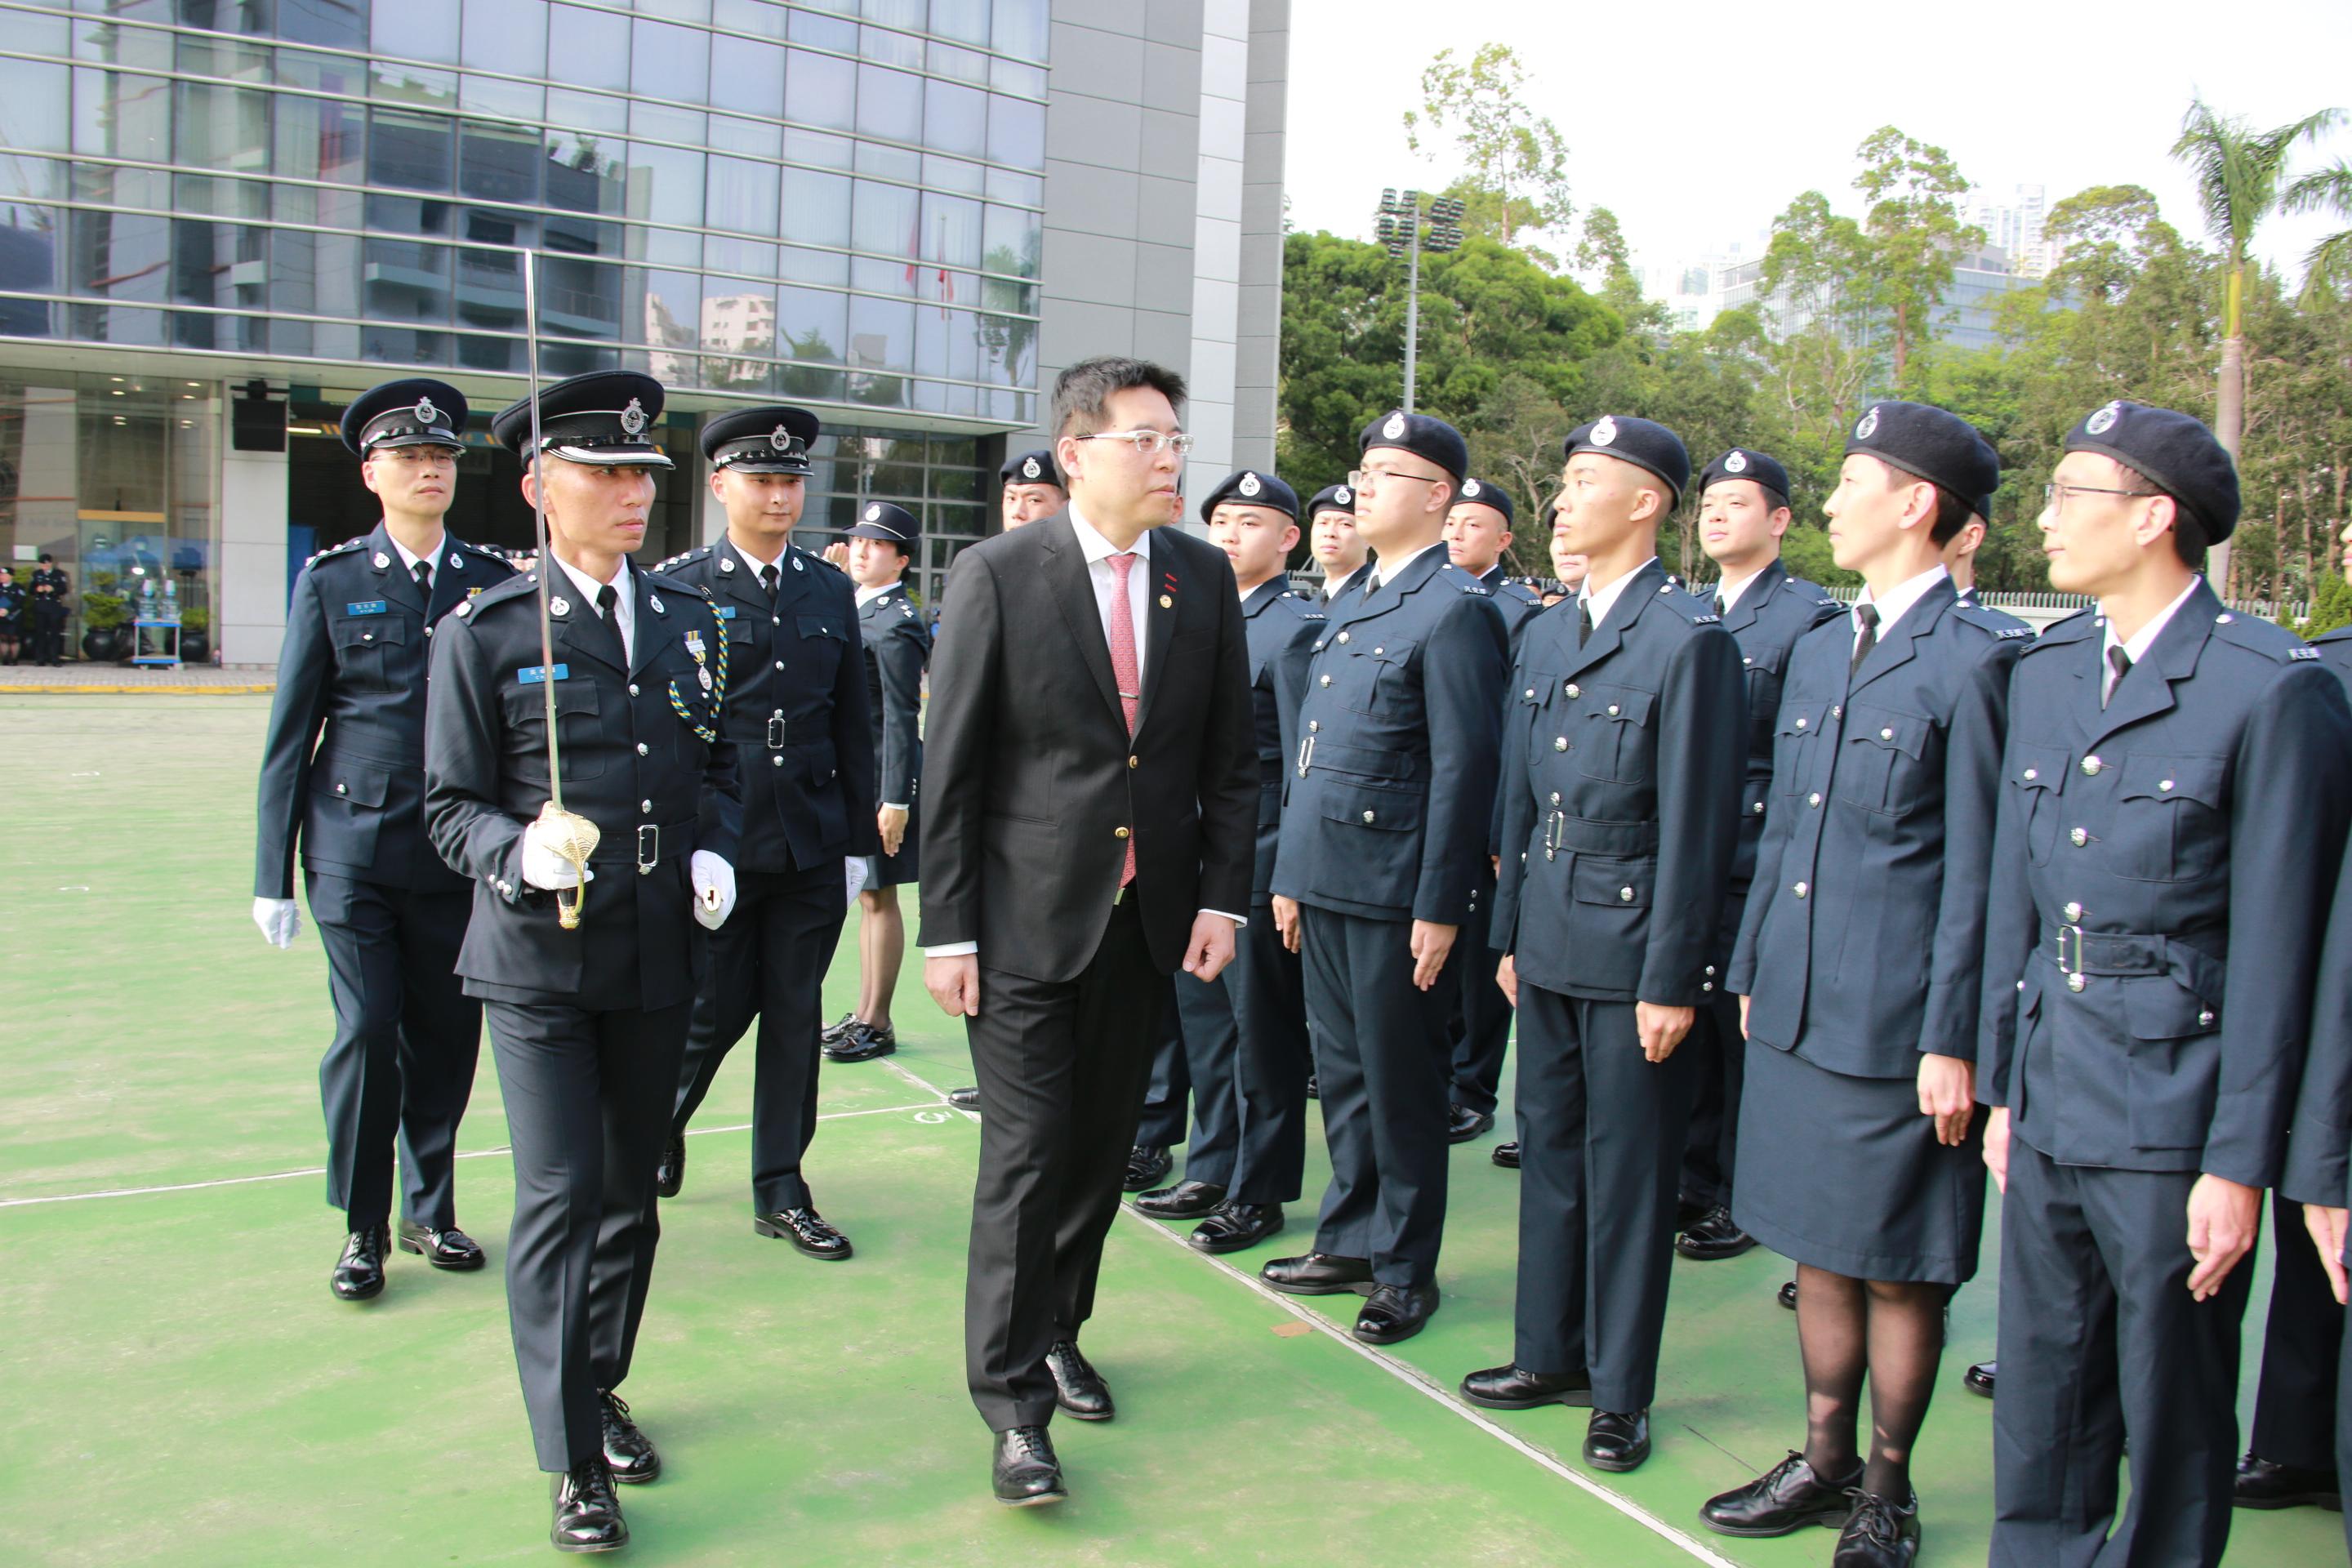 The Civil Aid Service held the 86th Recruits Passing-out Parade at its headquarters today (October 15). Photo shows member of the National Committee of the Chinese People's Political Consultative Conference Dr Chuang Tze-cheung (fourth left), inspecting the parade.